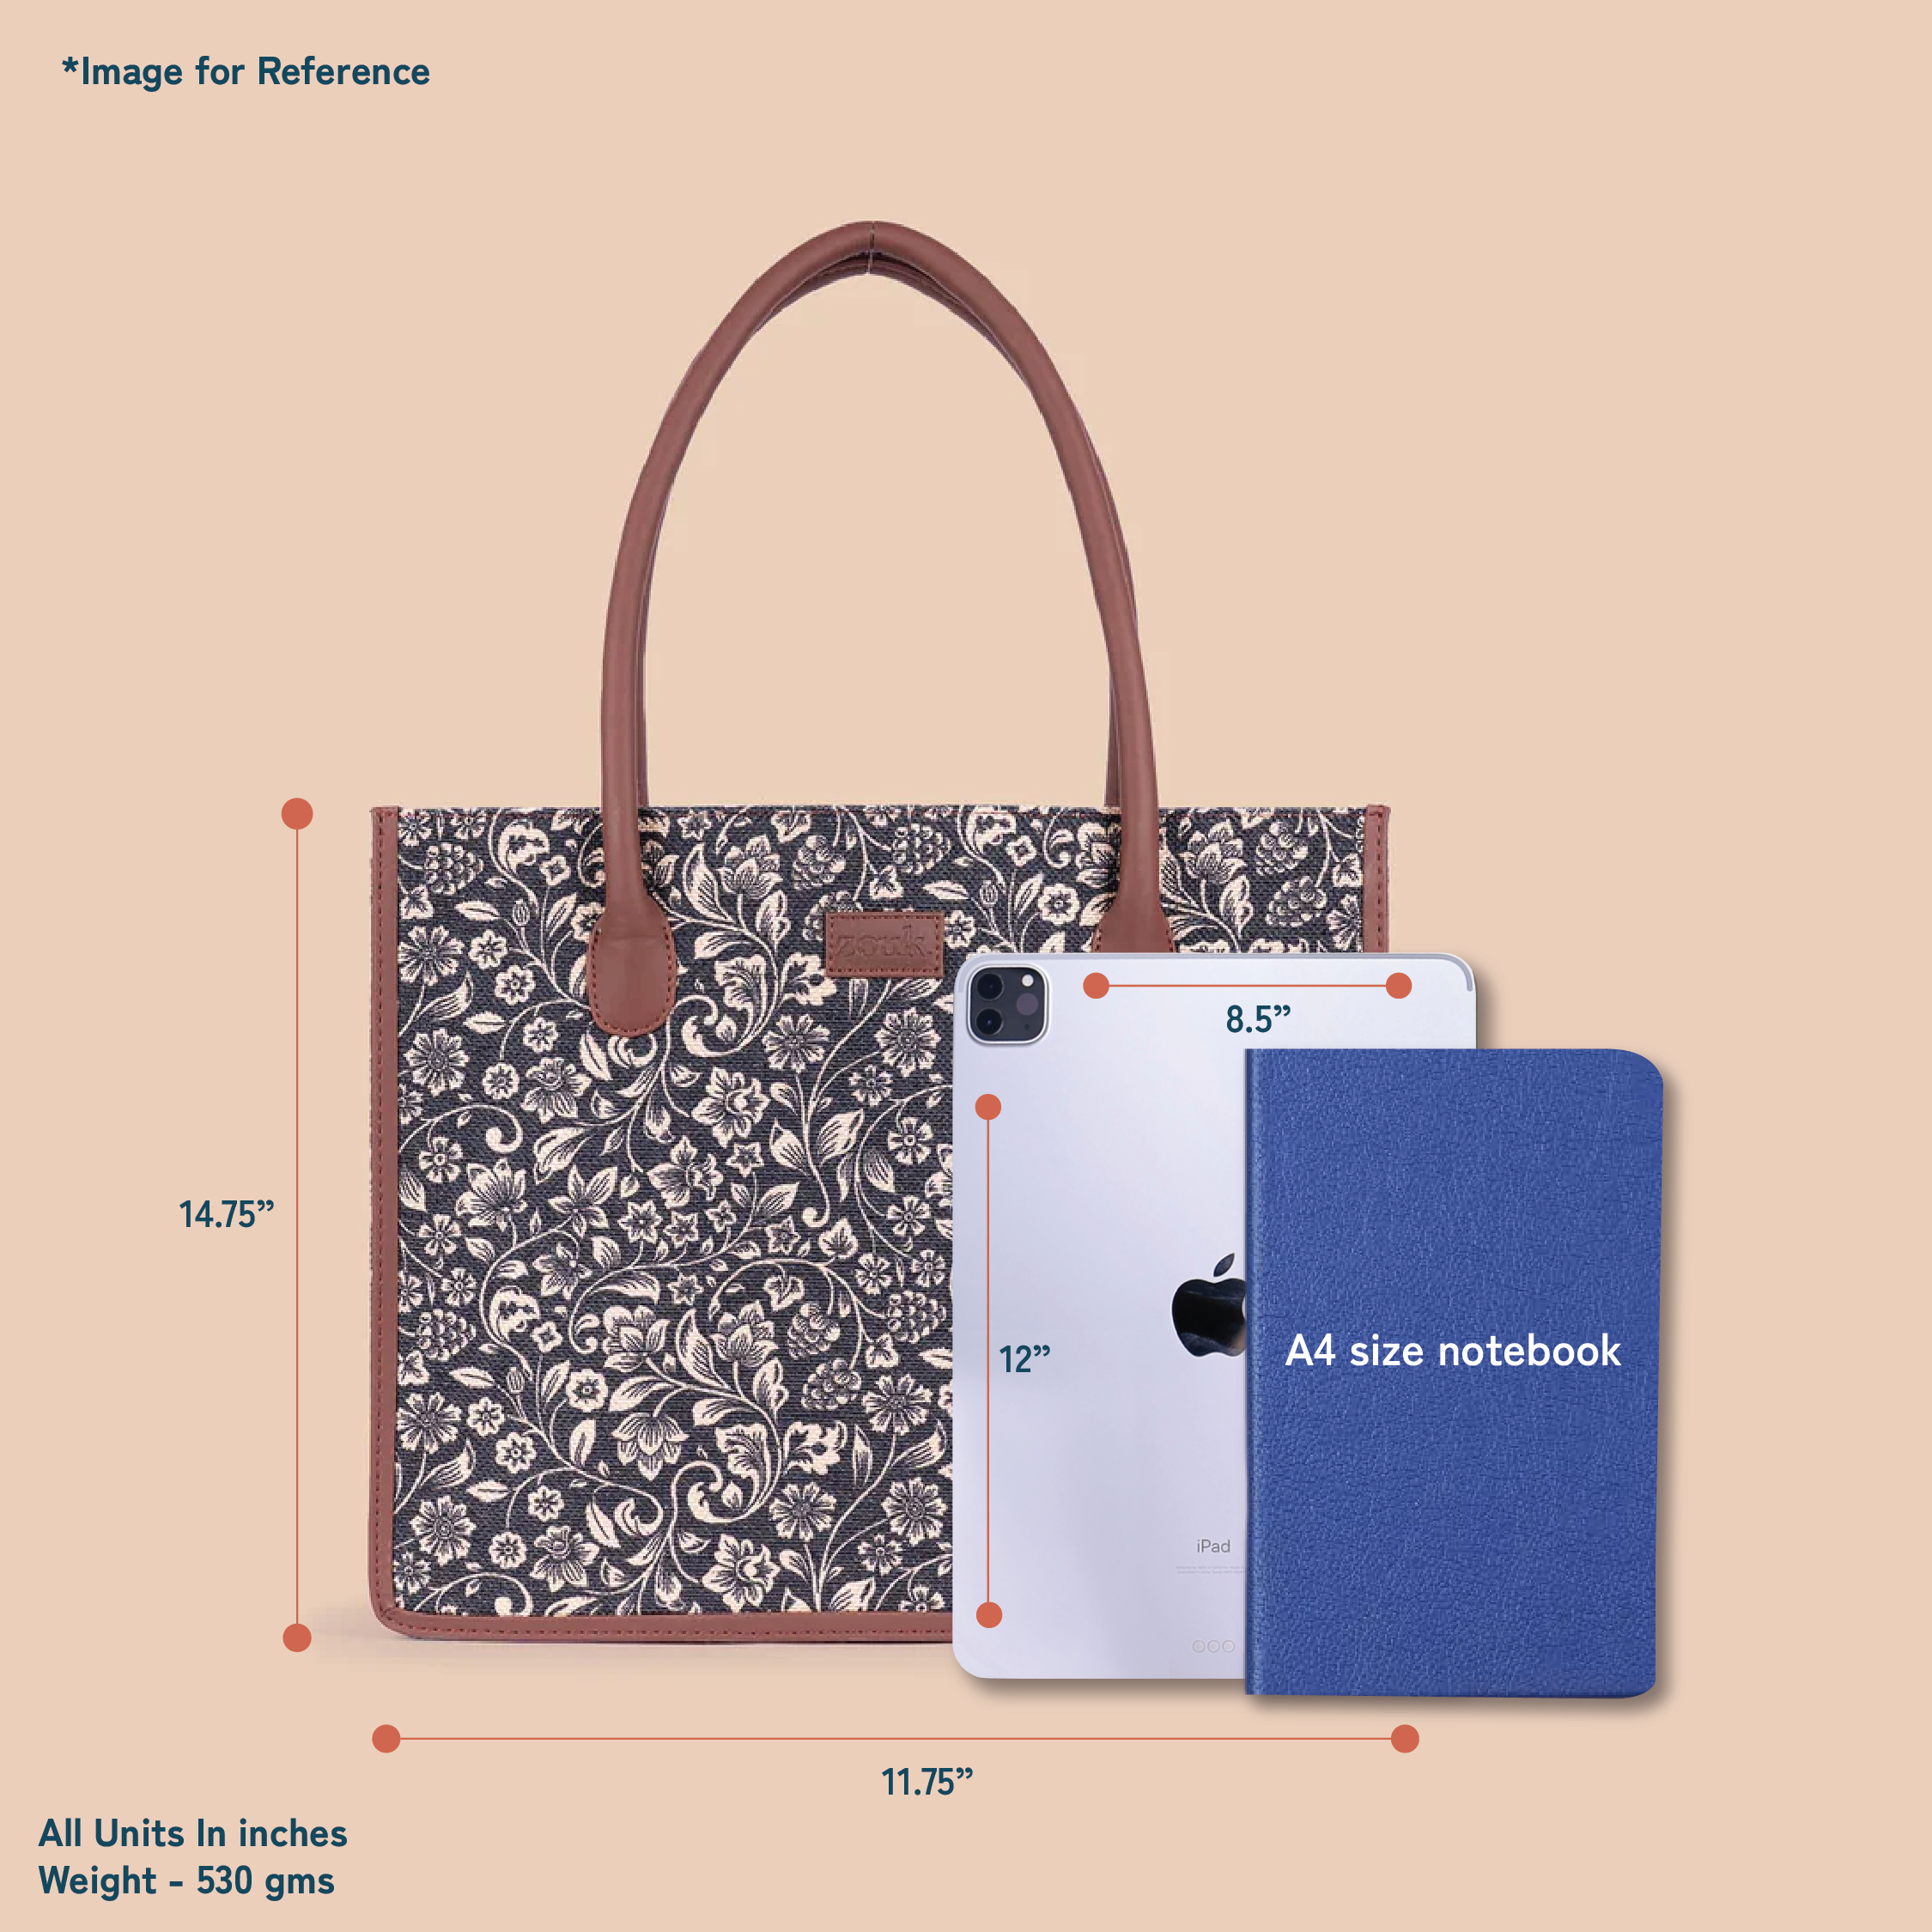 Agra Floral Book Tote